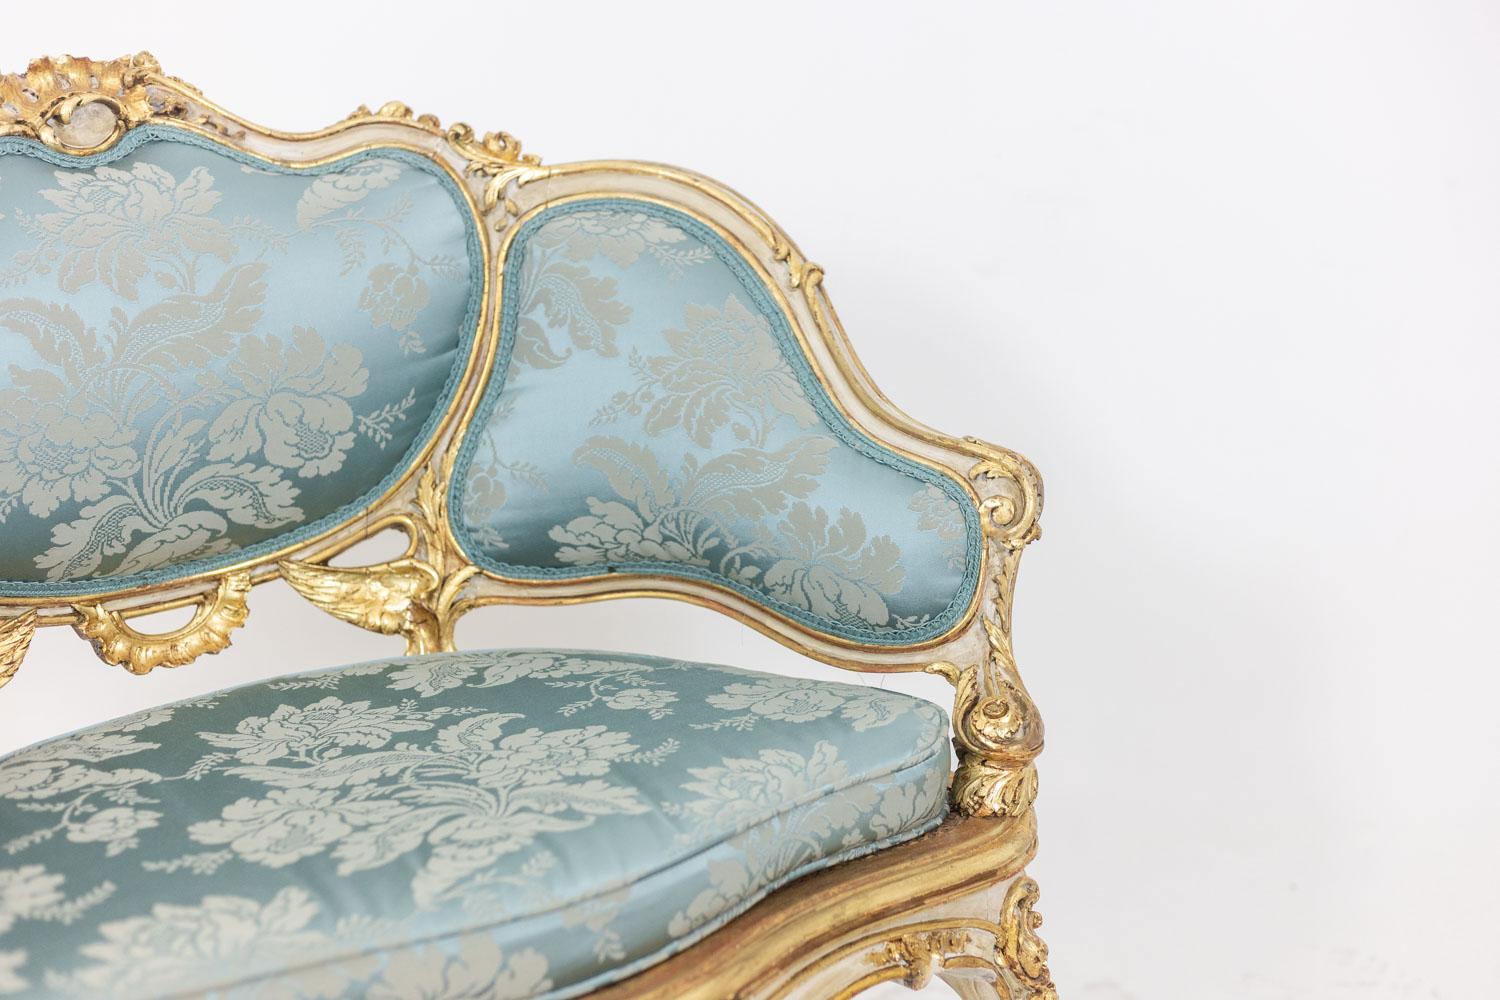 Fabric Marquise in gilded and carved wood in the LXV style. Circa 1880.